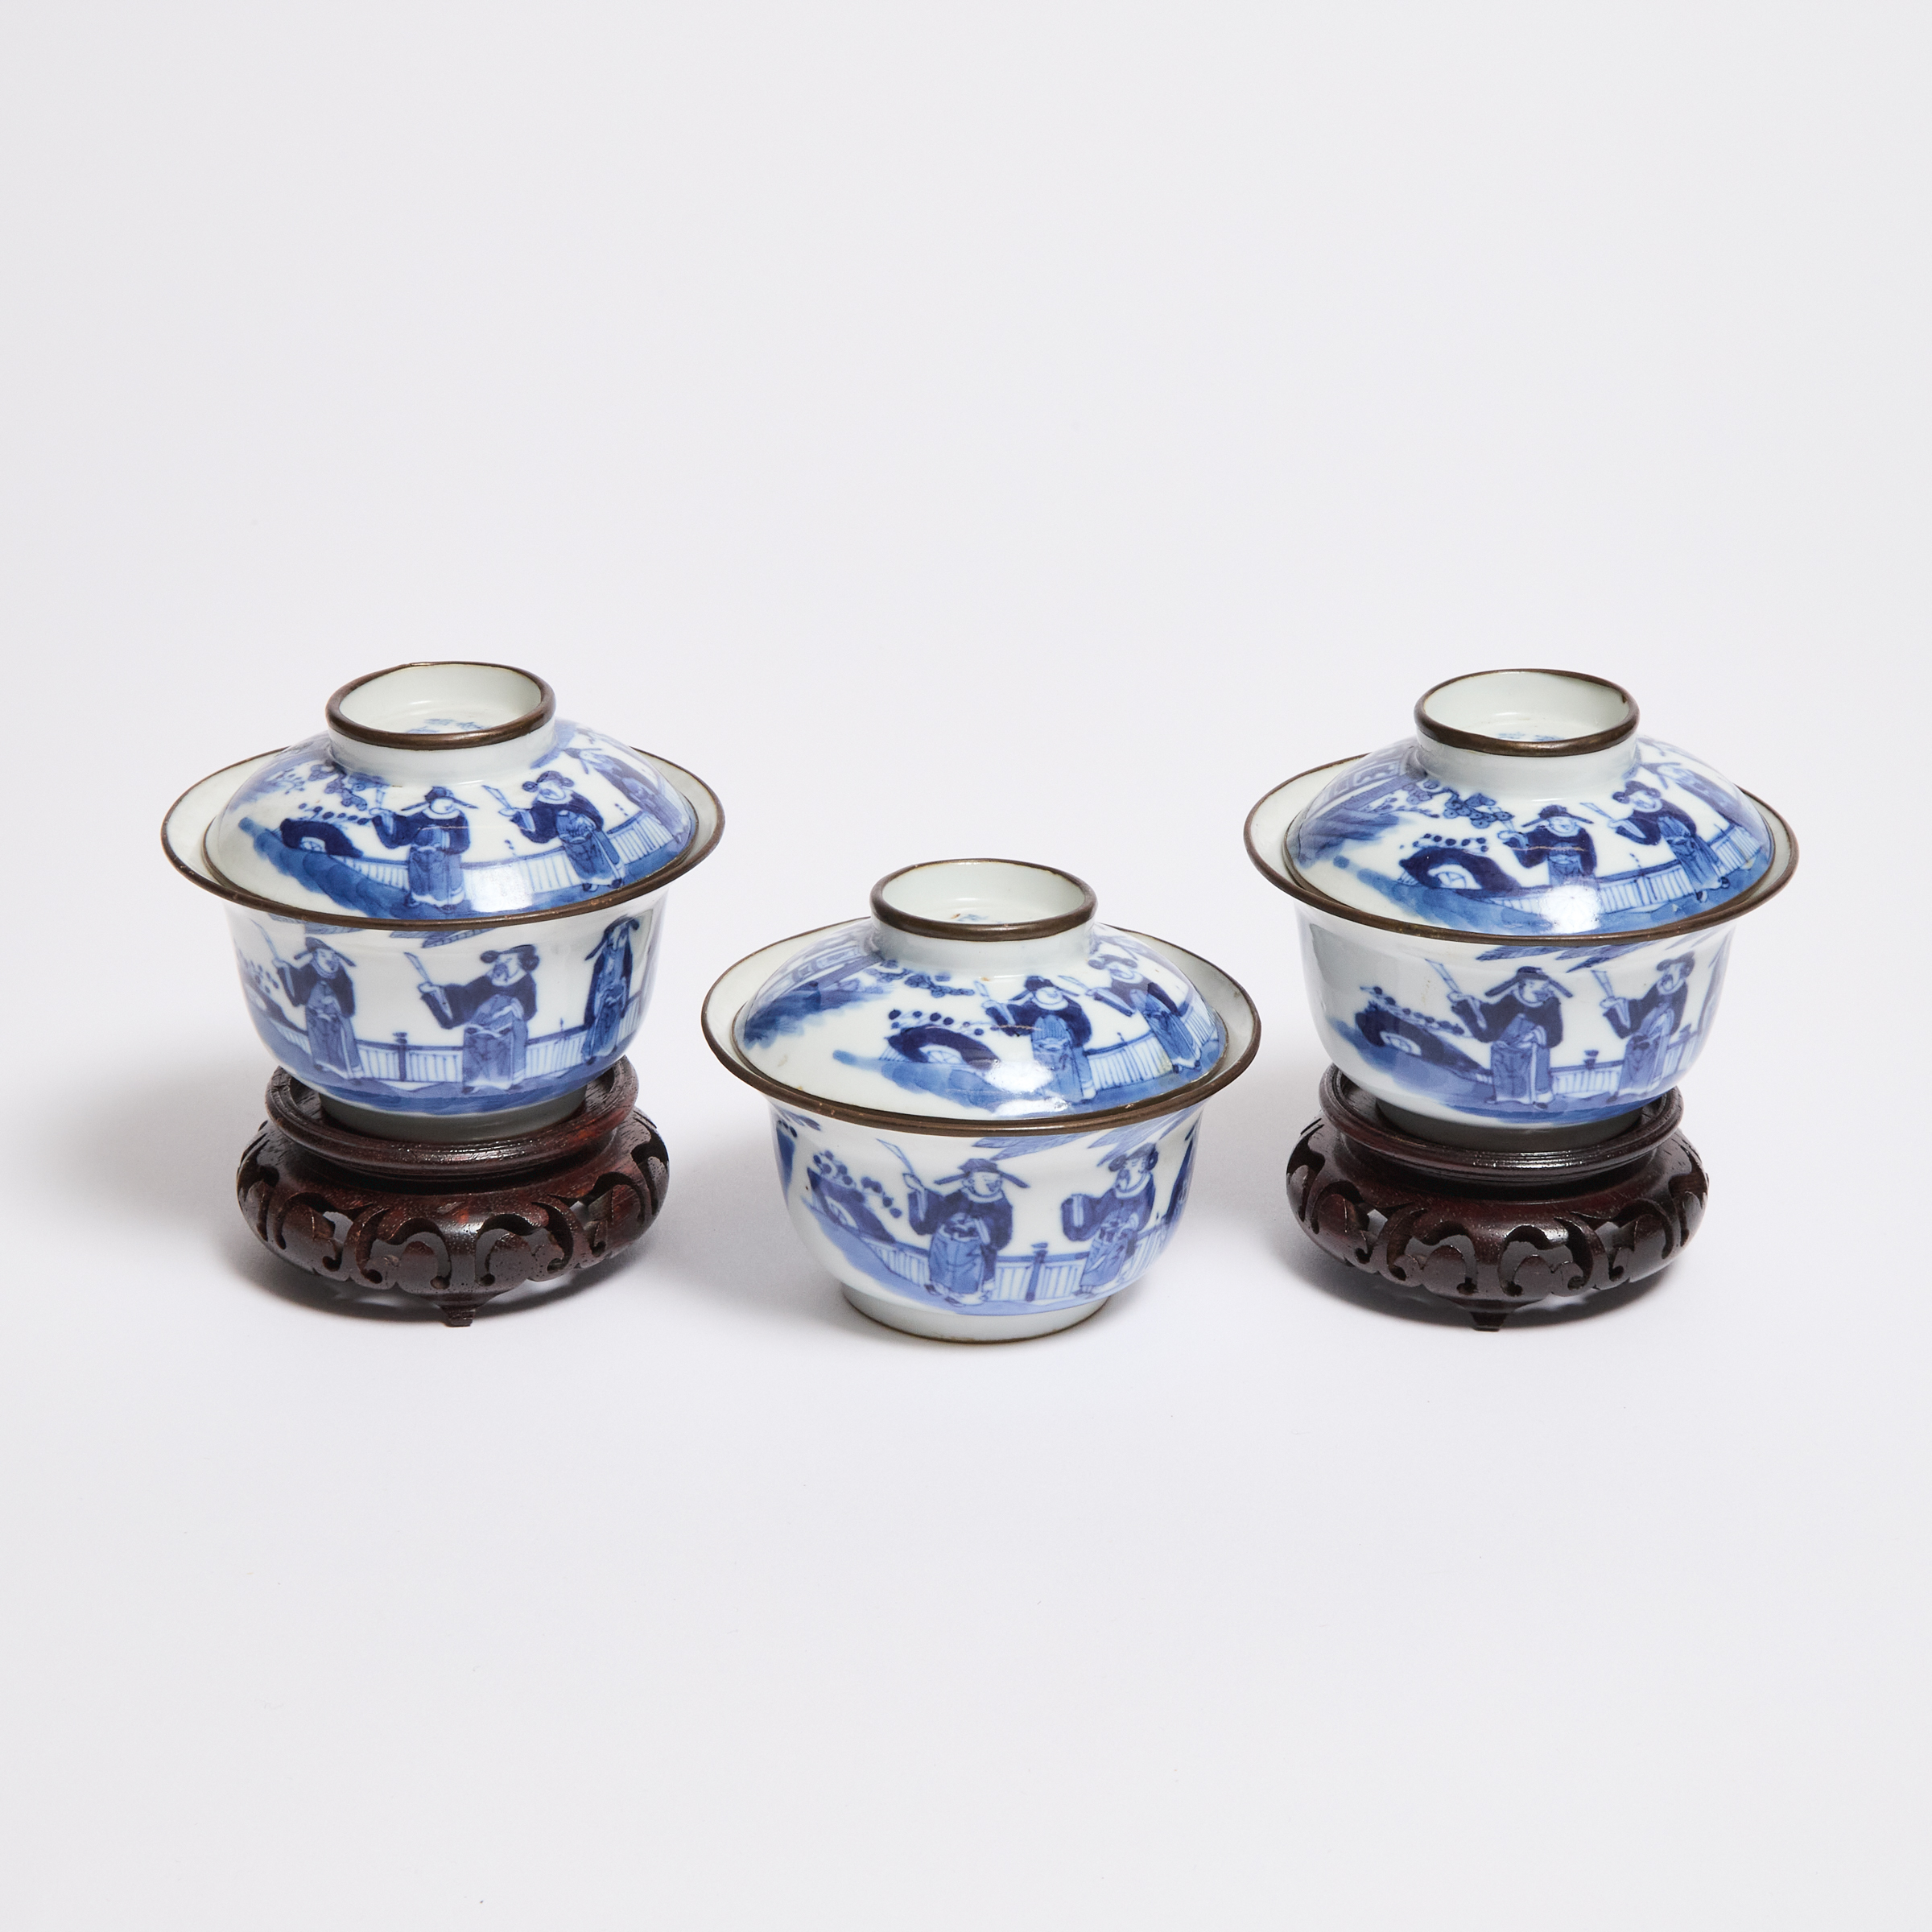 A Set of Three Blue and White Porcelain